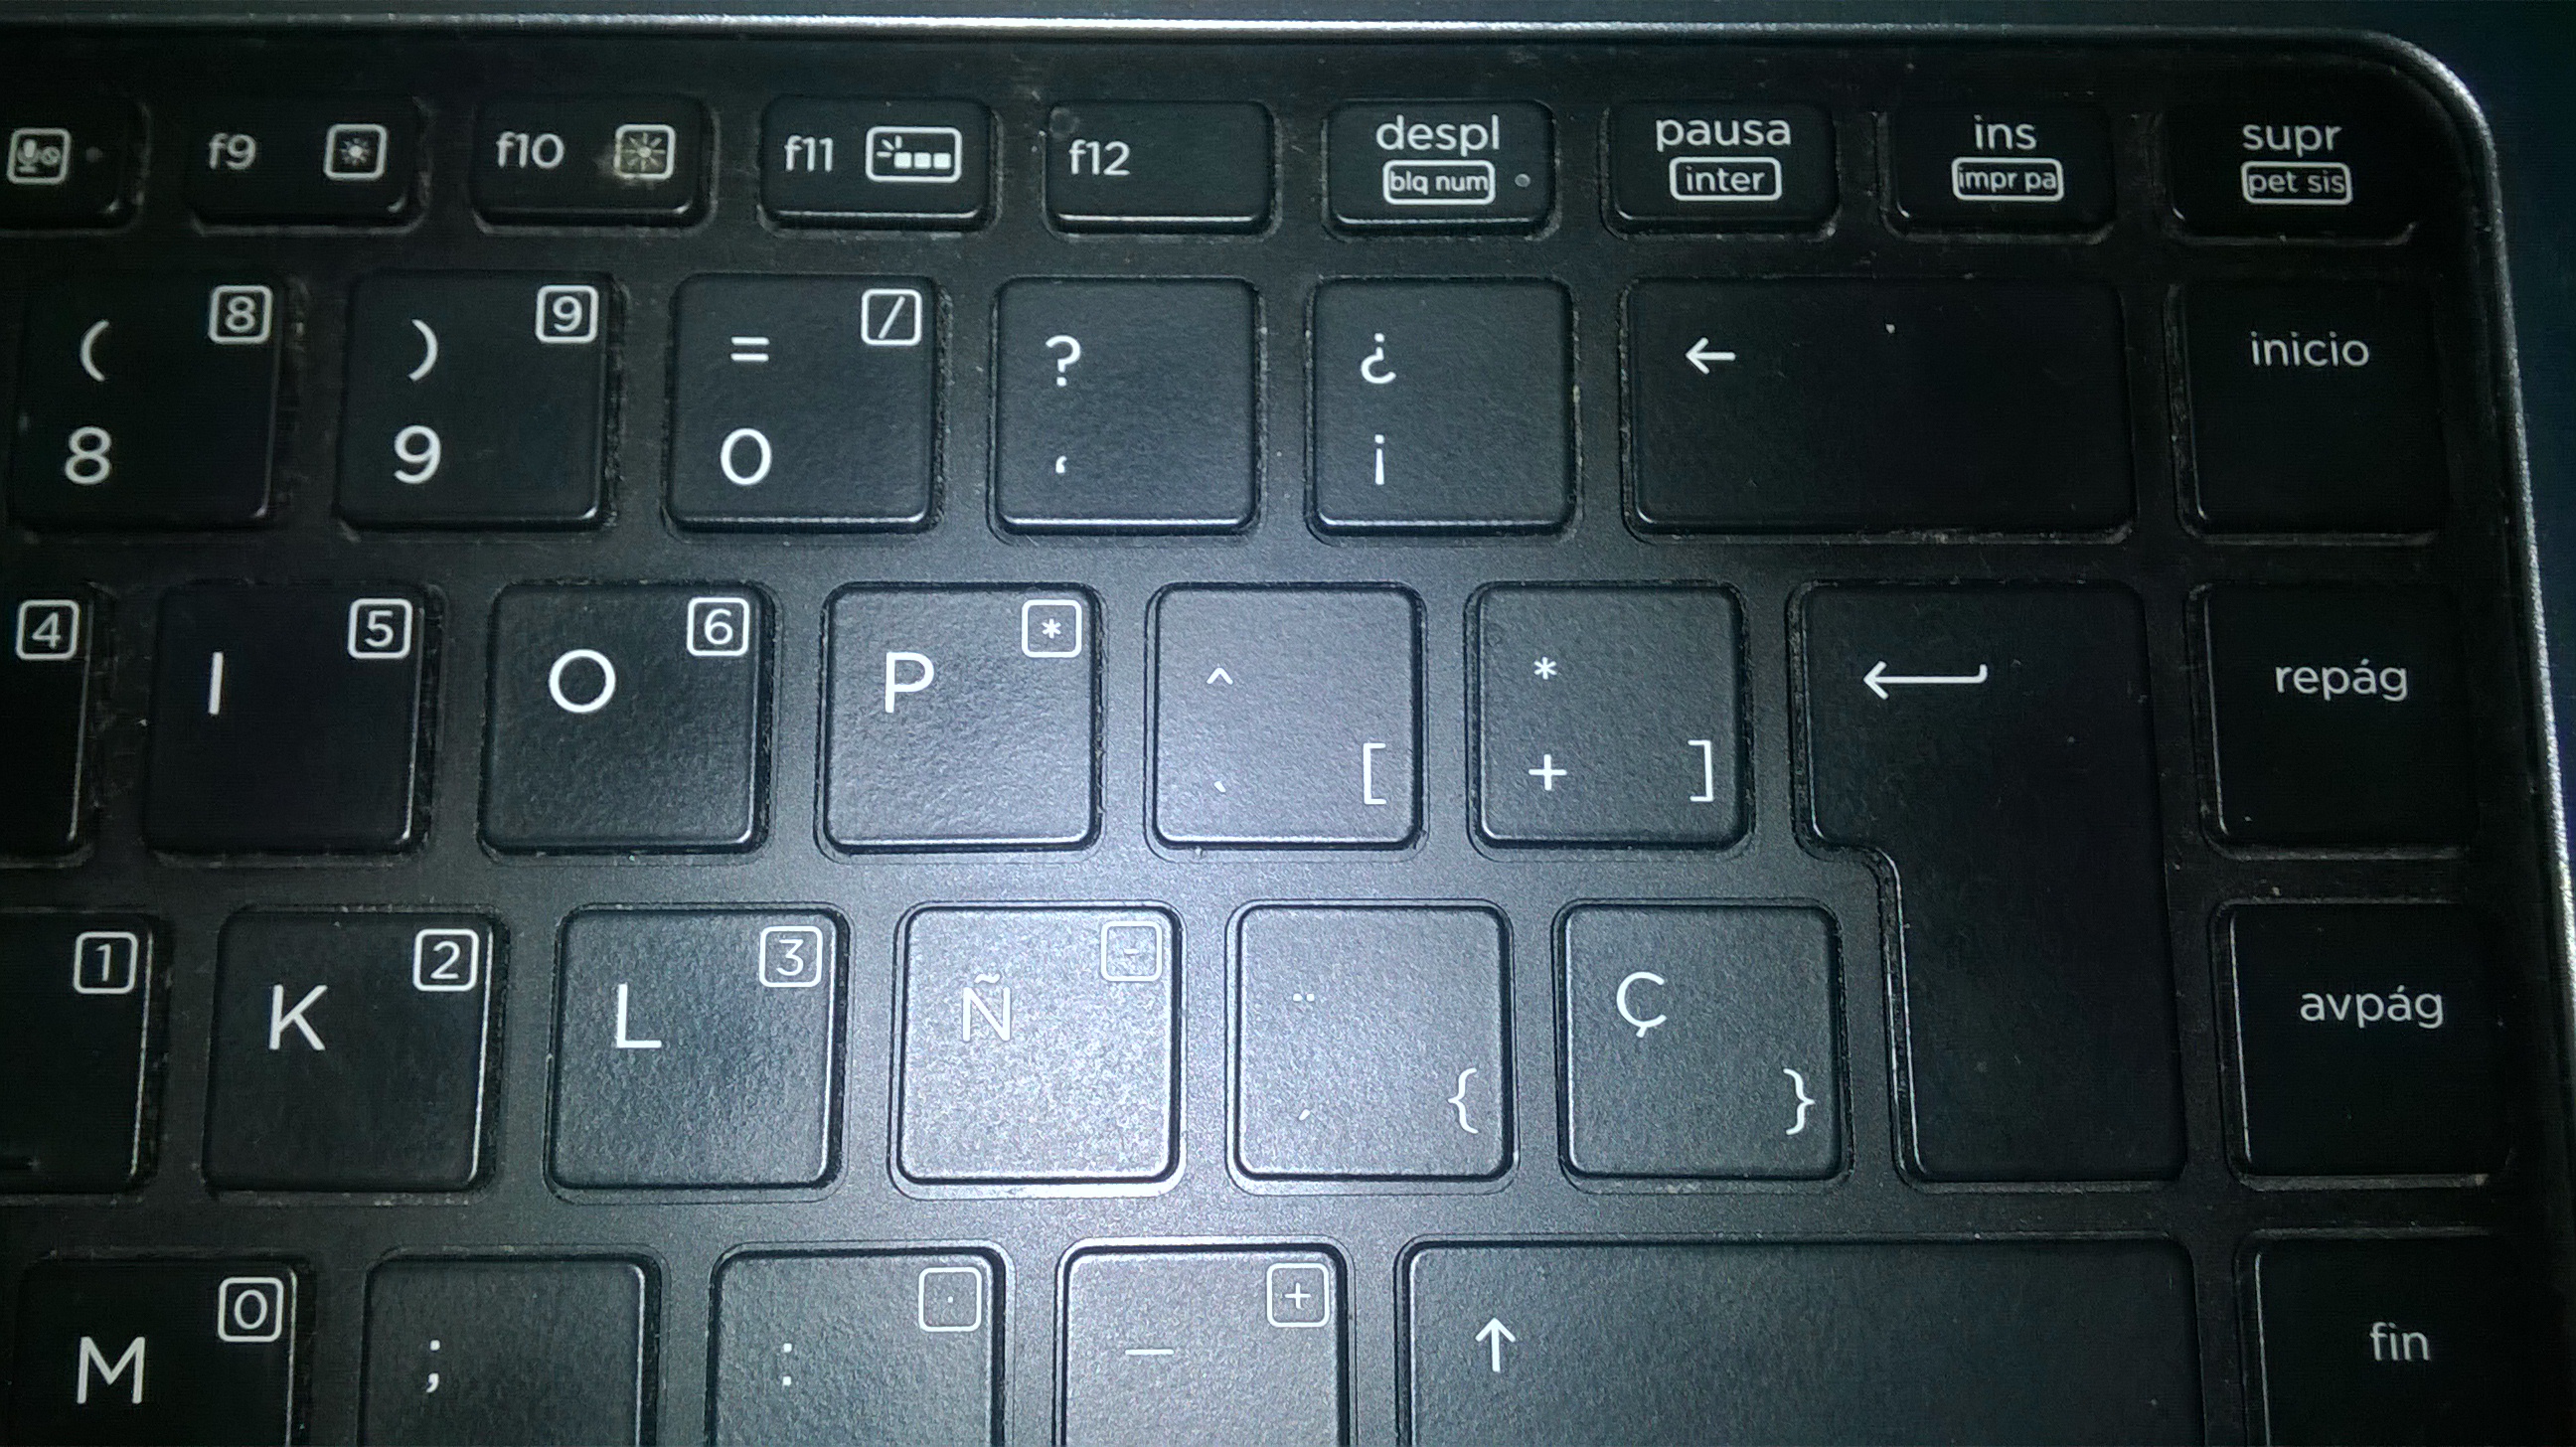 Could not be able to Detect the Keyboard Layout of which cou... - HP  Support Community - 7011050